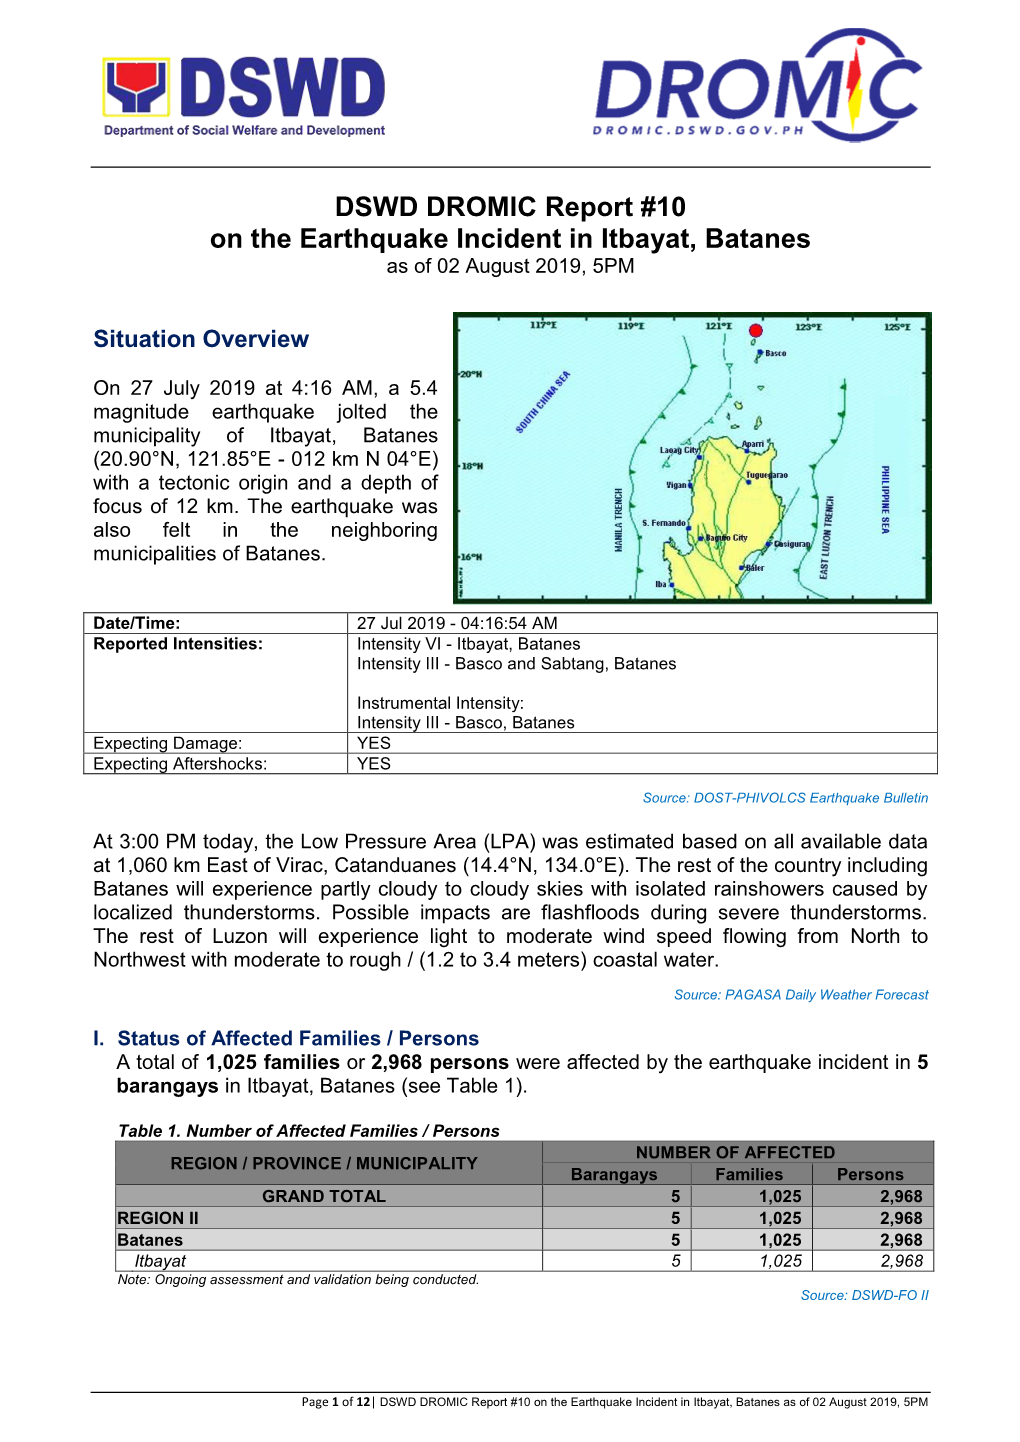 DSWD DROMIC Report #10 on the Earthquake Incident in Itbayat, Batanes As of 02 August 2019, 5PM